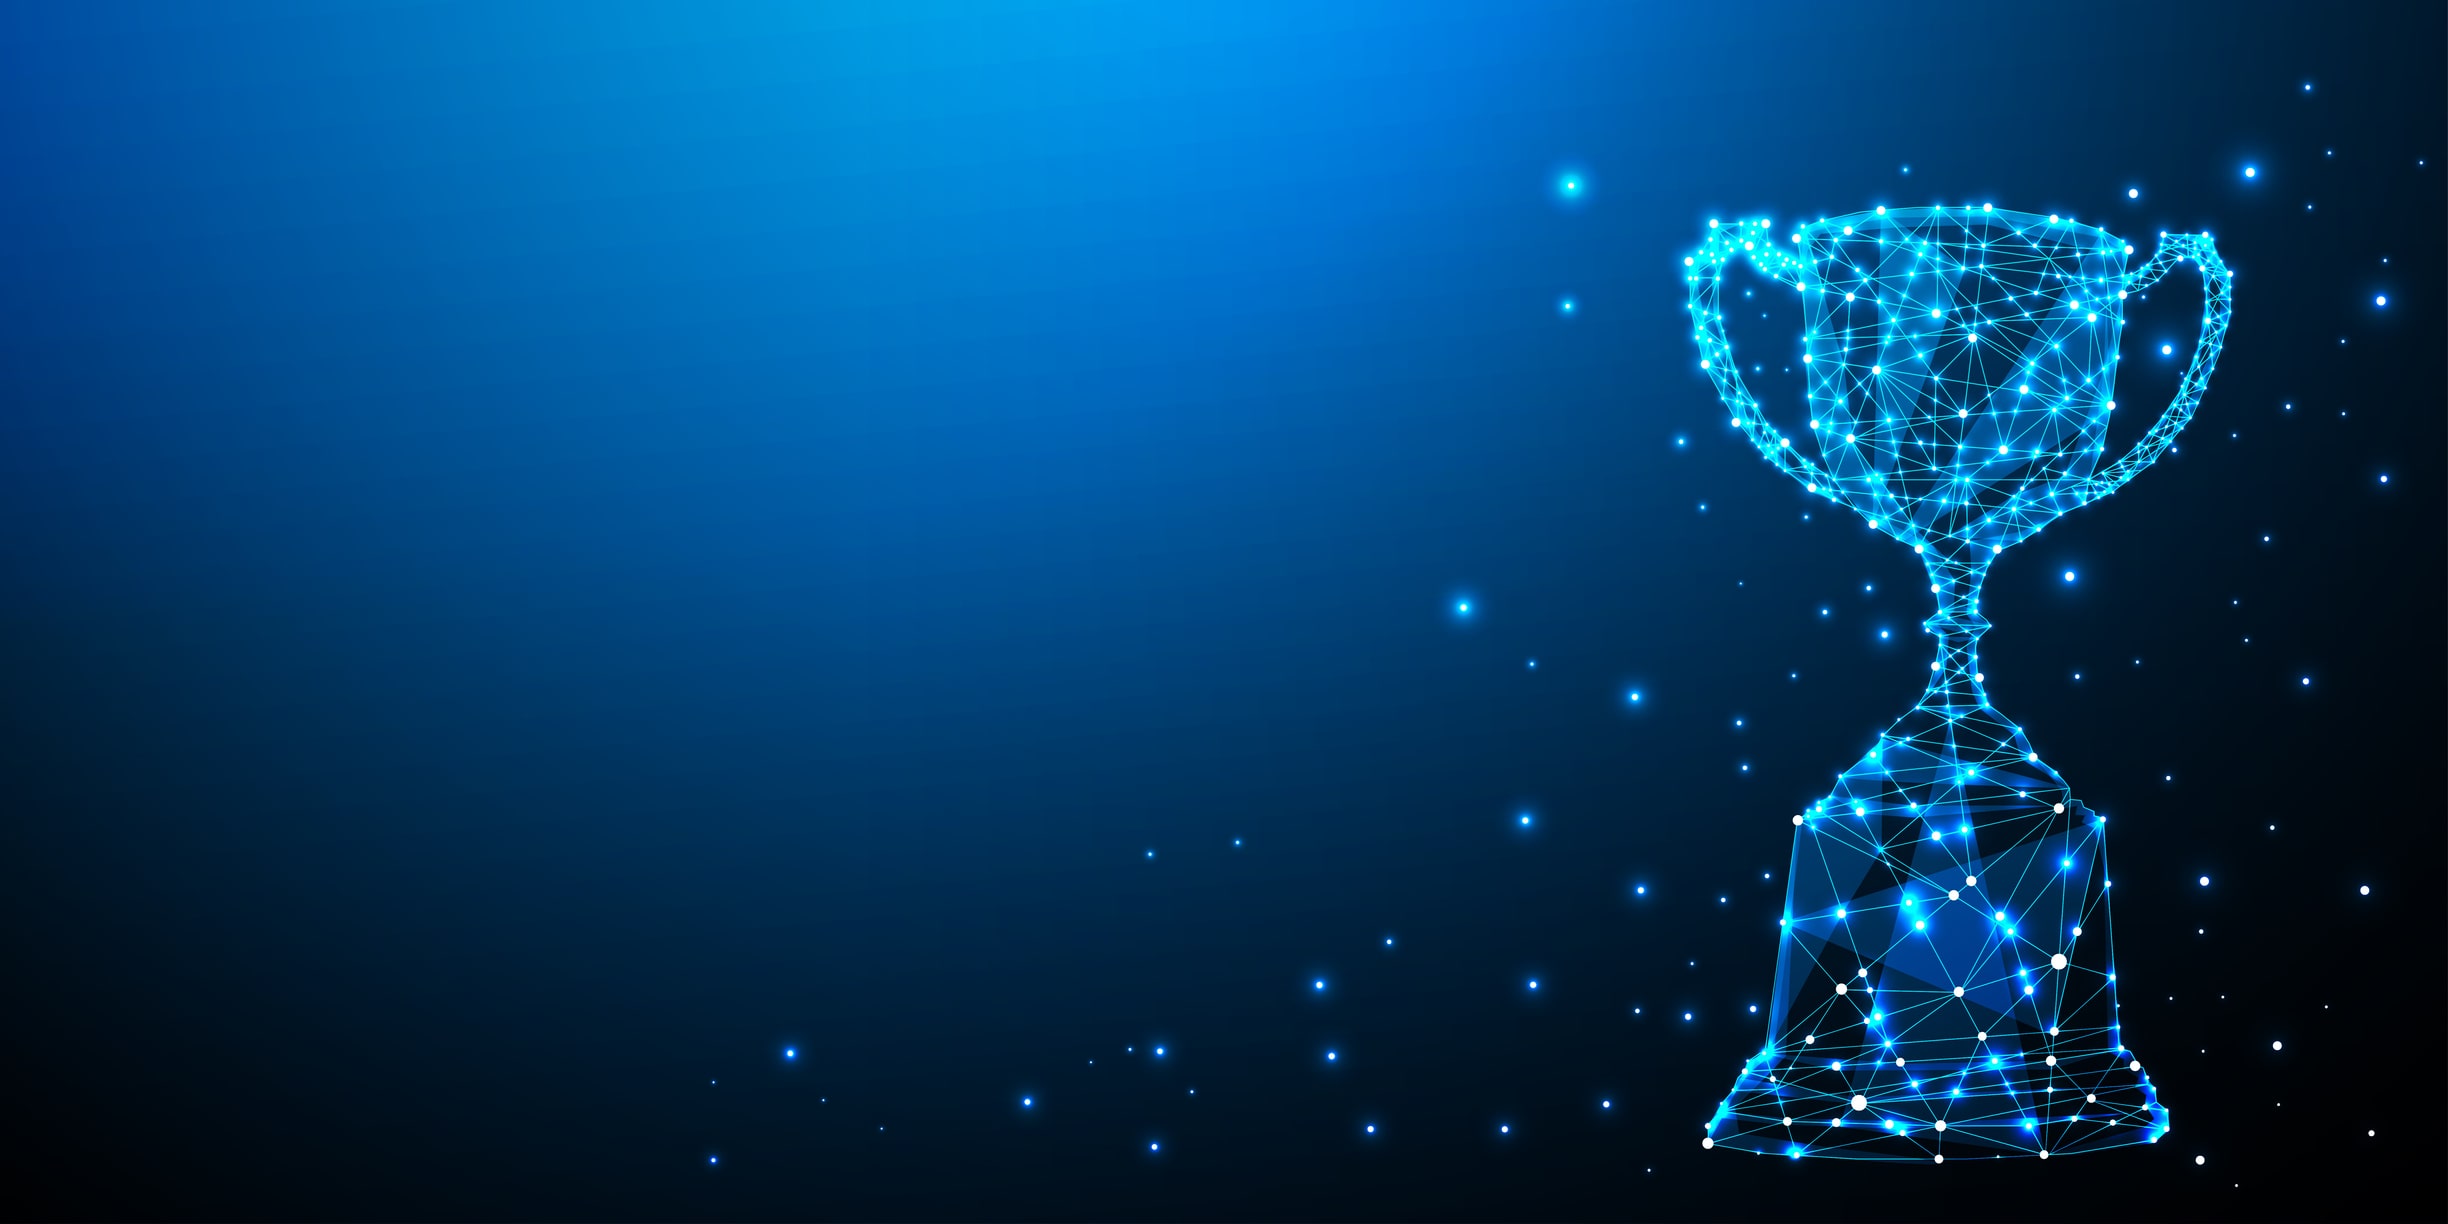 Digital Samba has been awarded a RemoteTech Breakthrough Award 2022 in the Overall Video Conferencing Solution of the Year category.